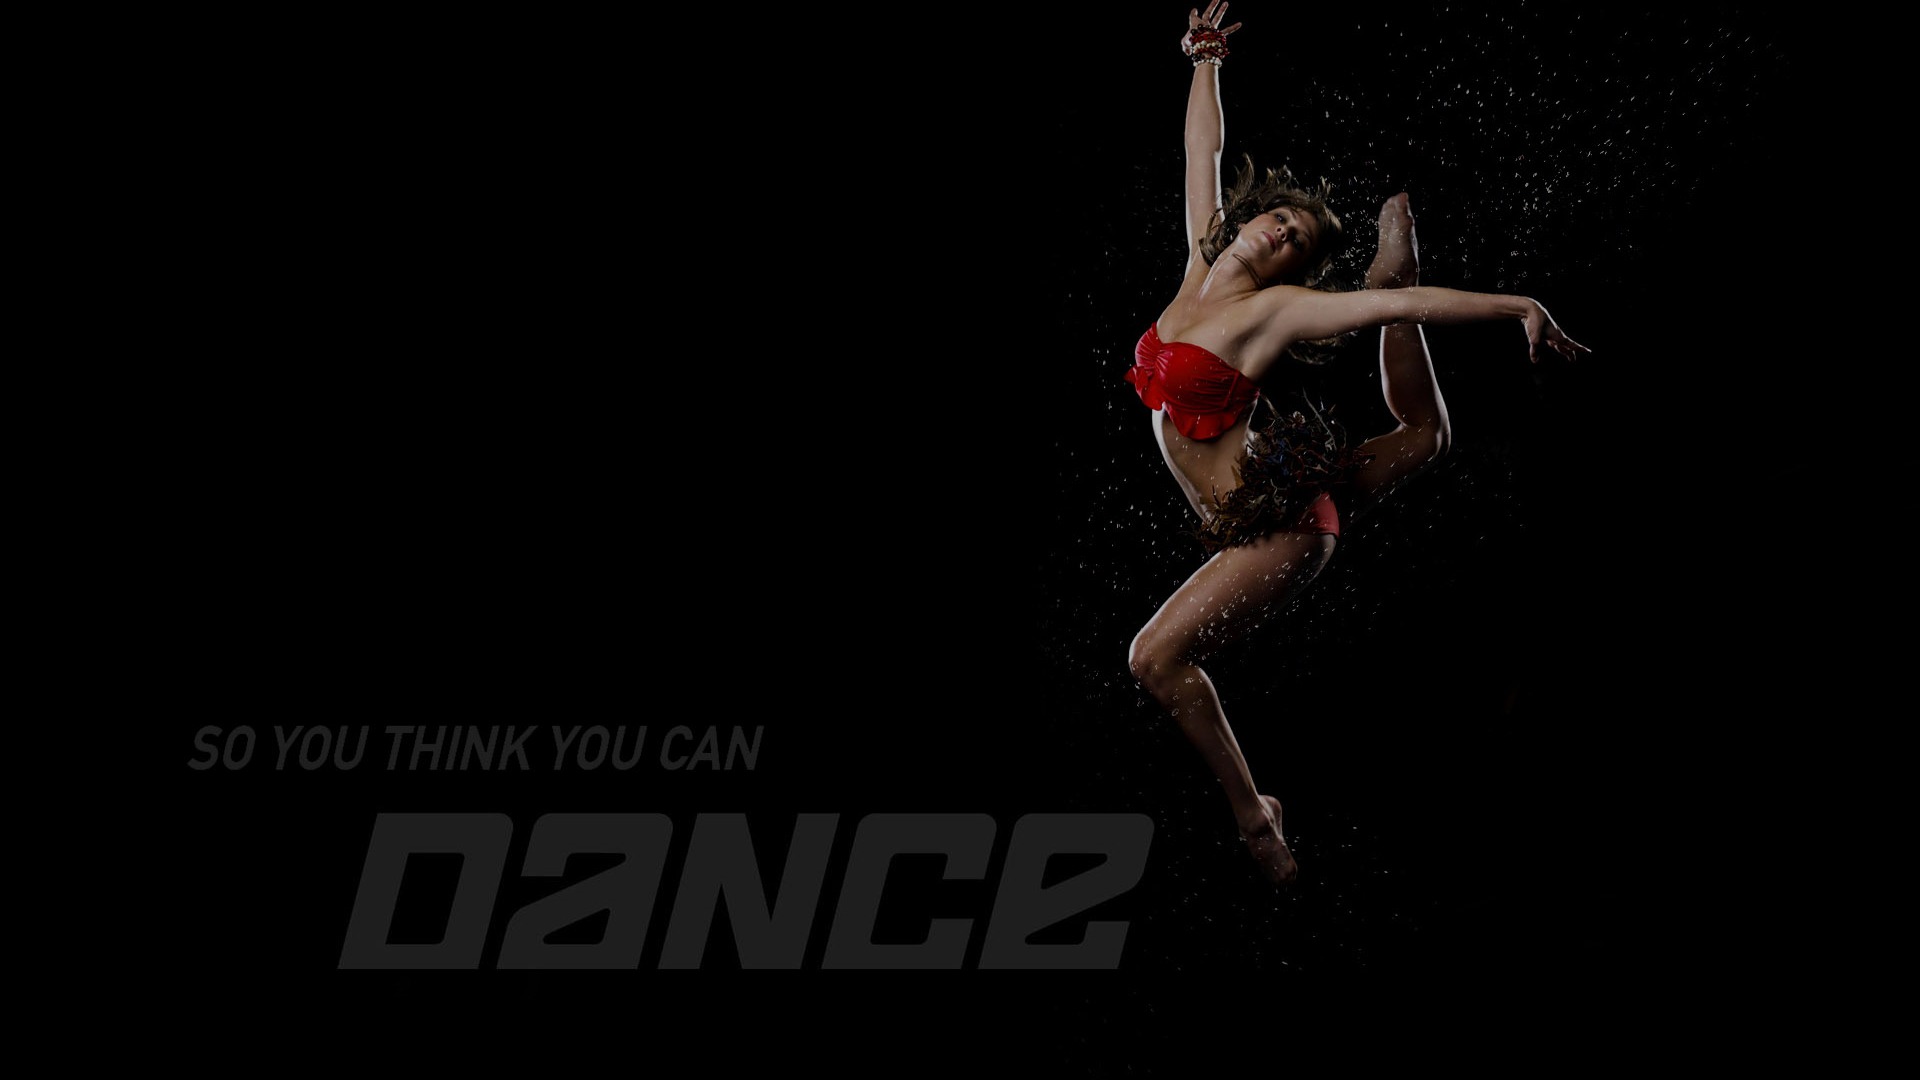 So You Think You Can Dance 舞林爭霸壁紙(二) #13 - 1920x1080